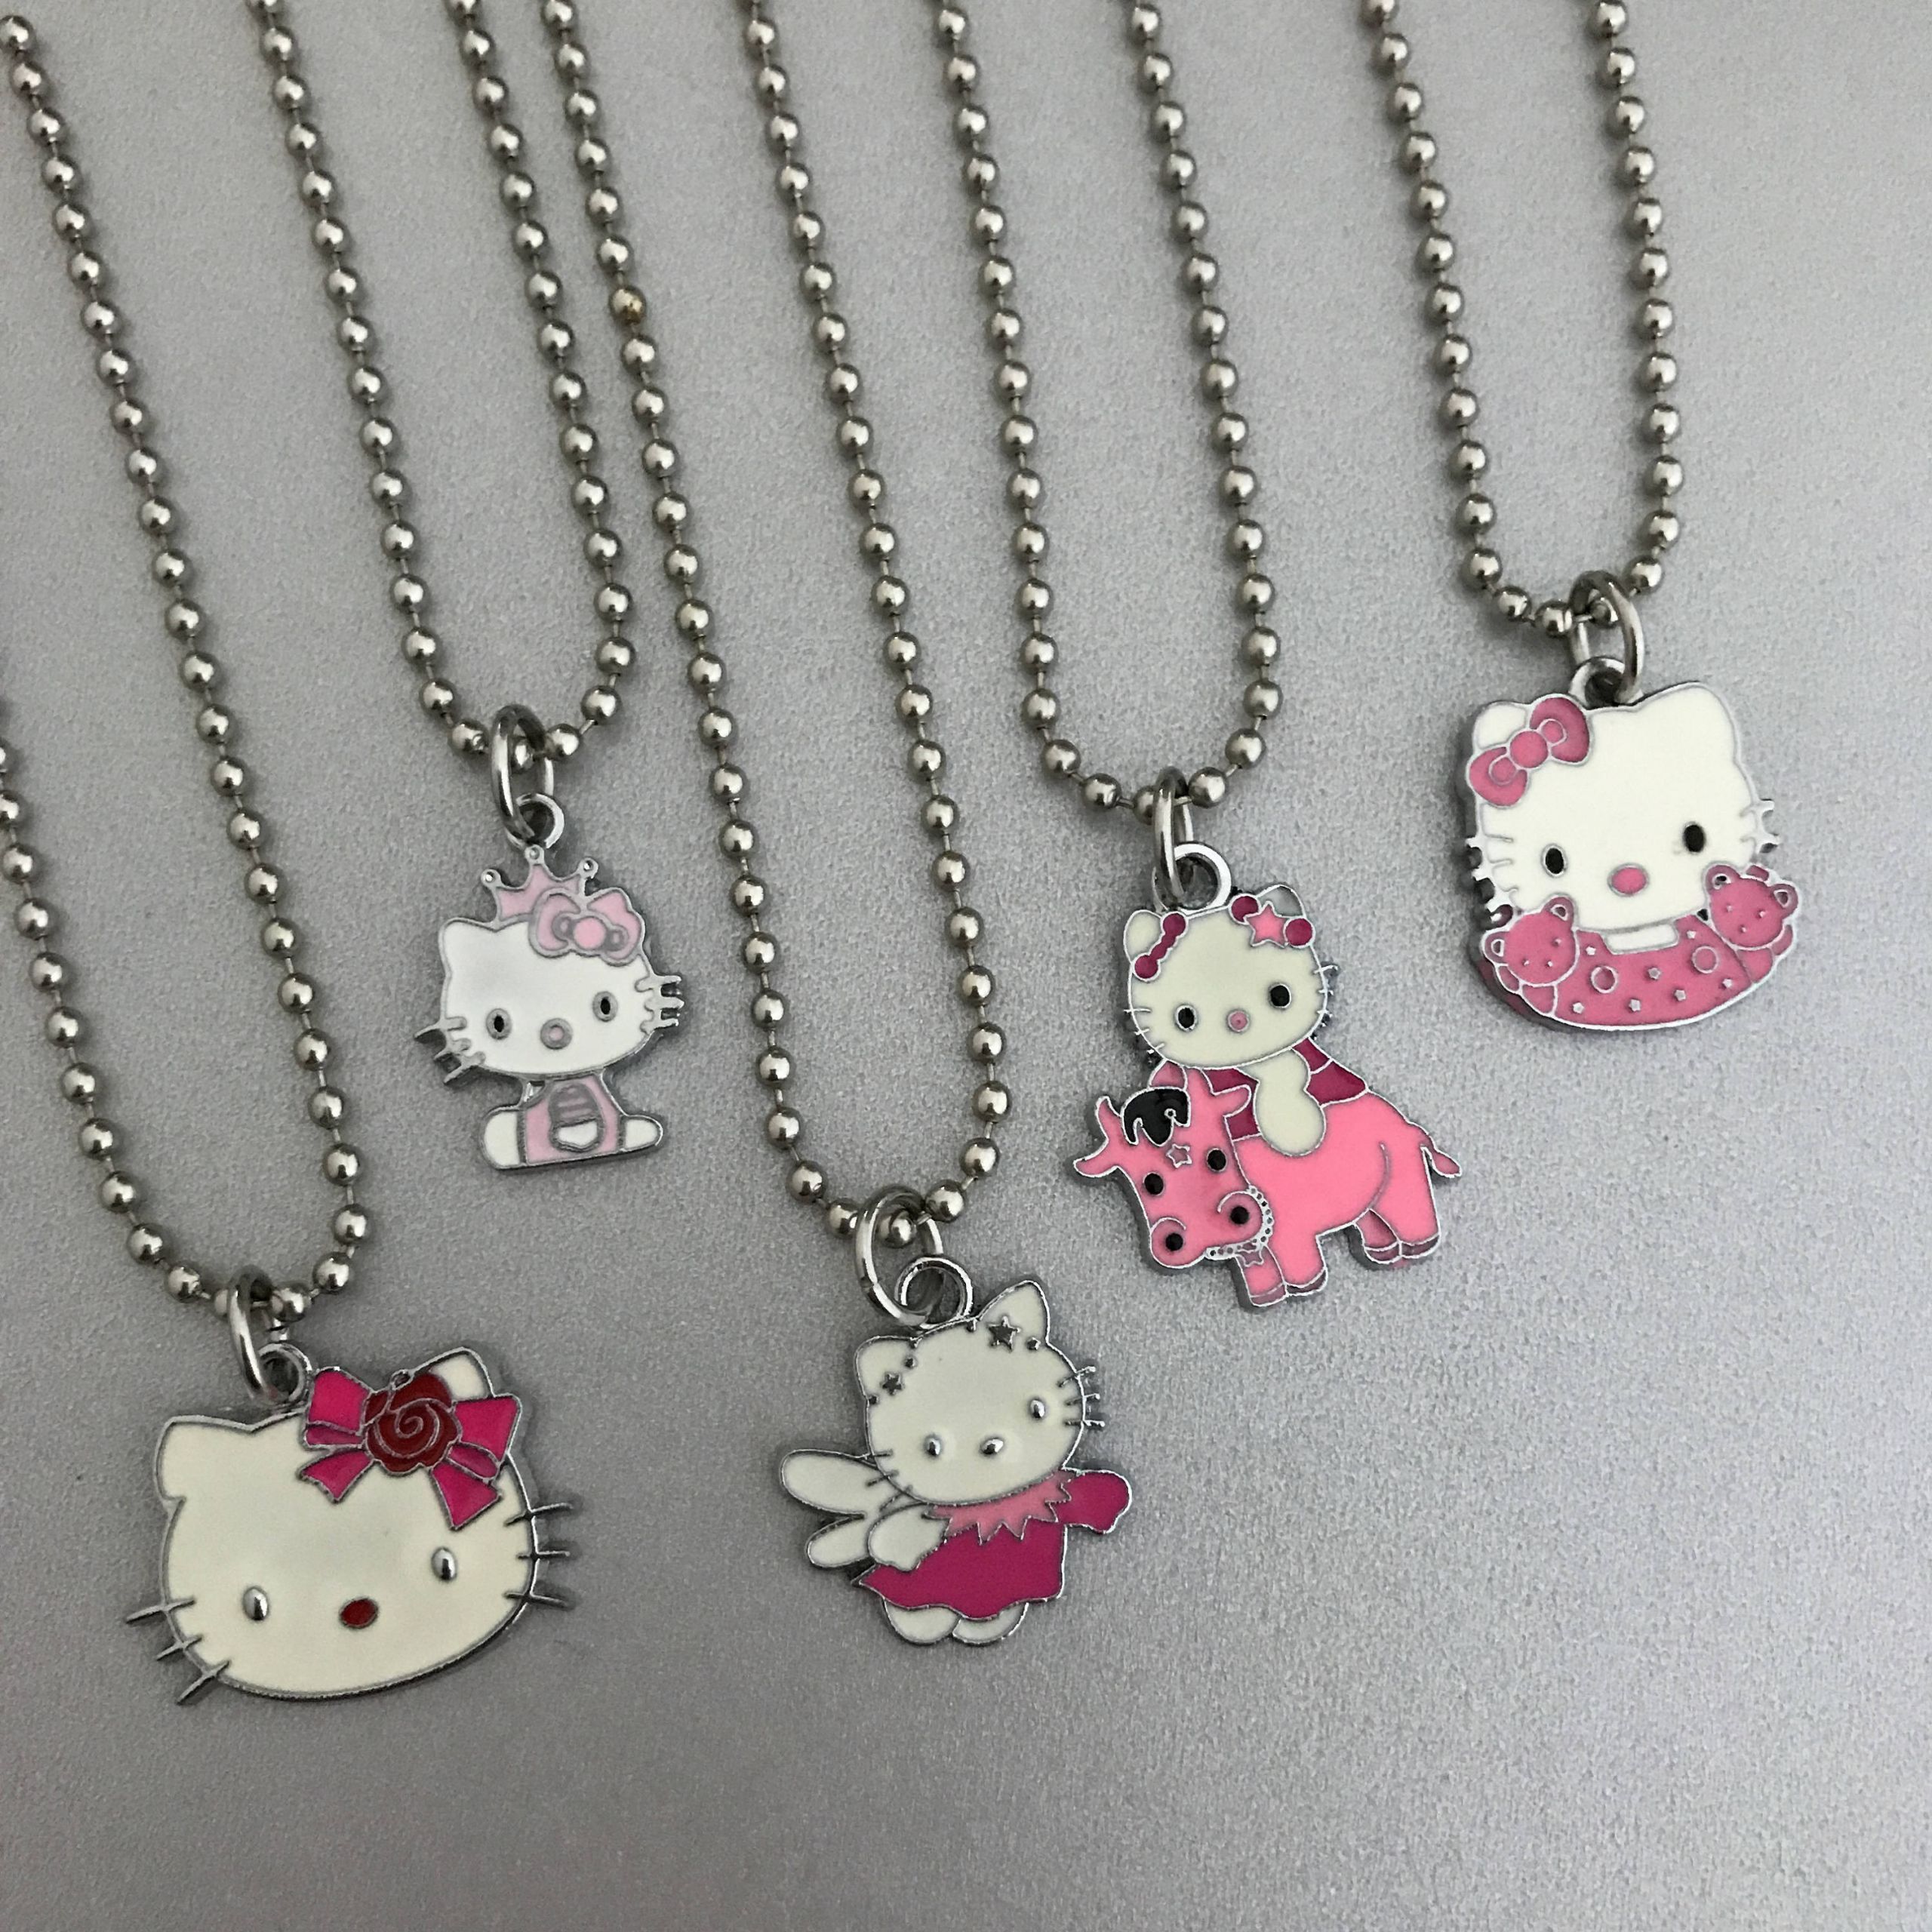 Hello Kitty Necklace
 SALE Hello Kitty Necklace Charm Necklace 90s Jewelry Cute